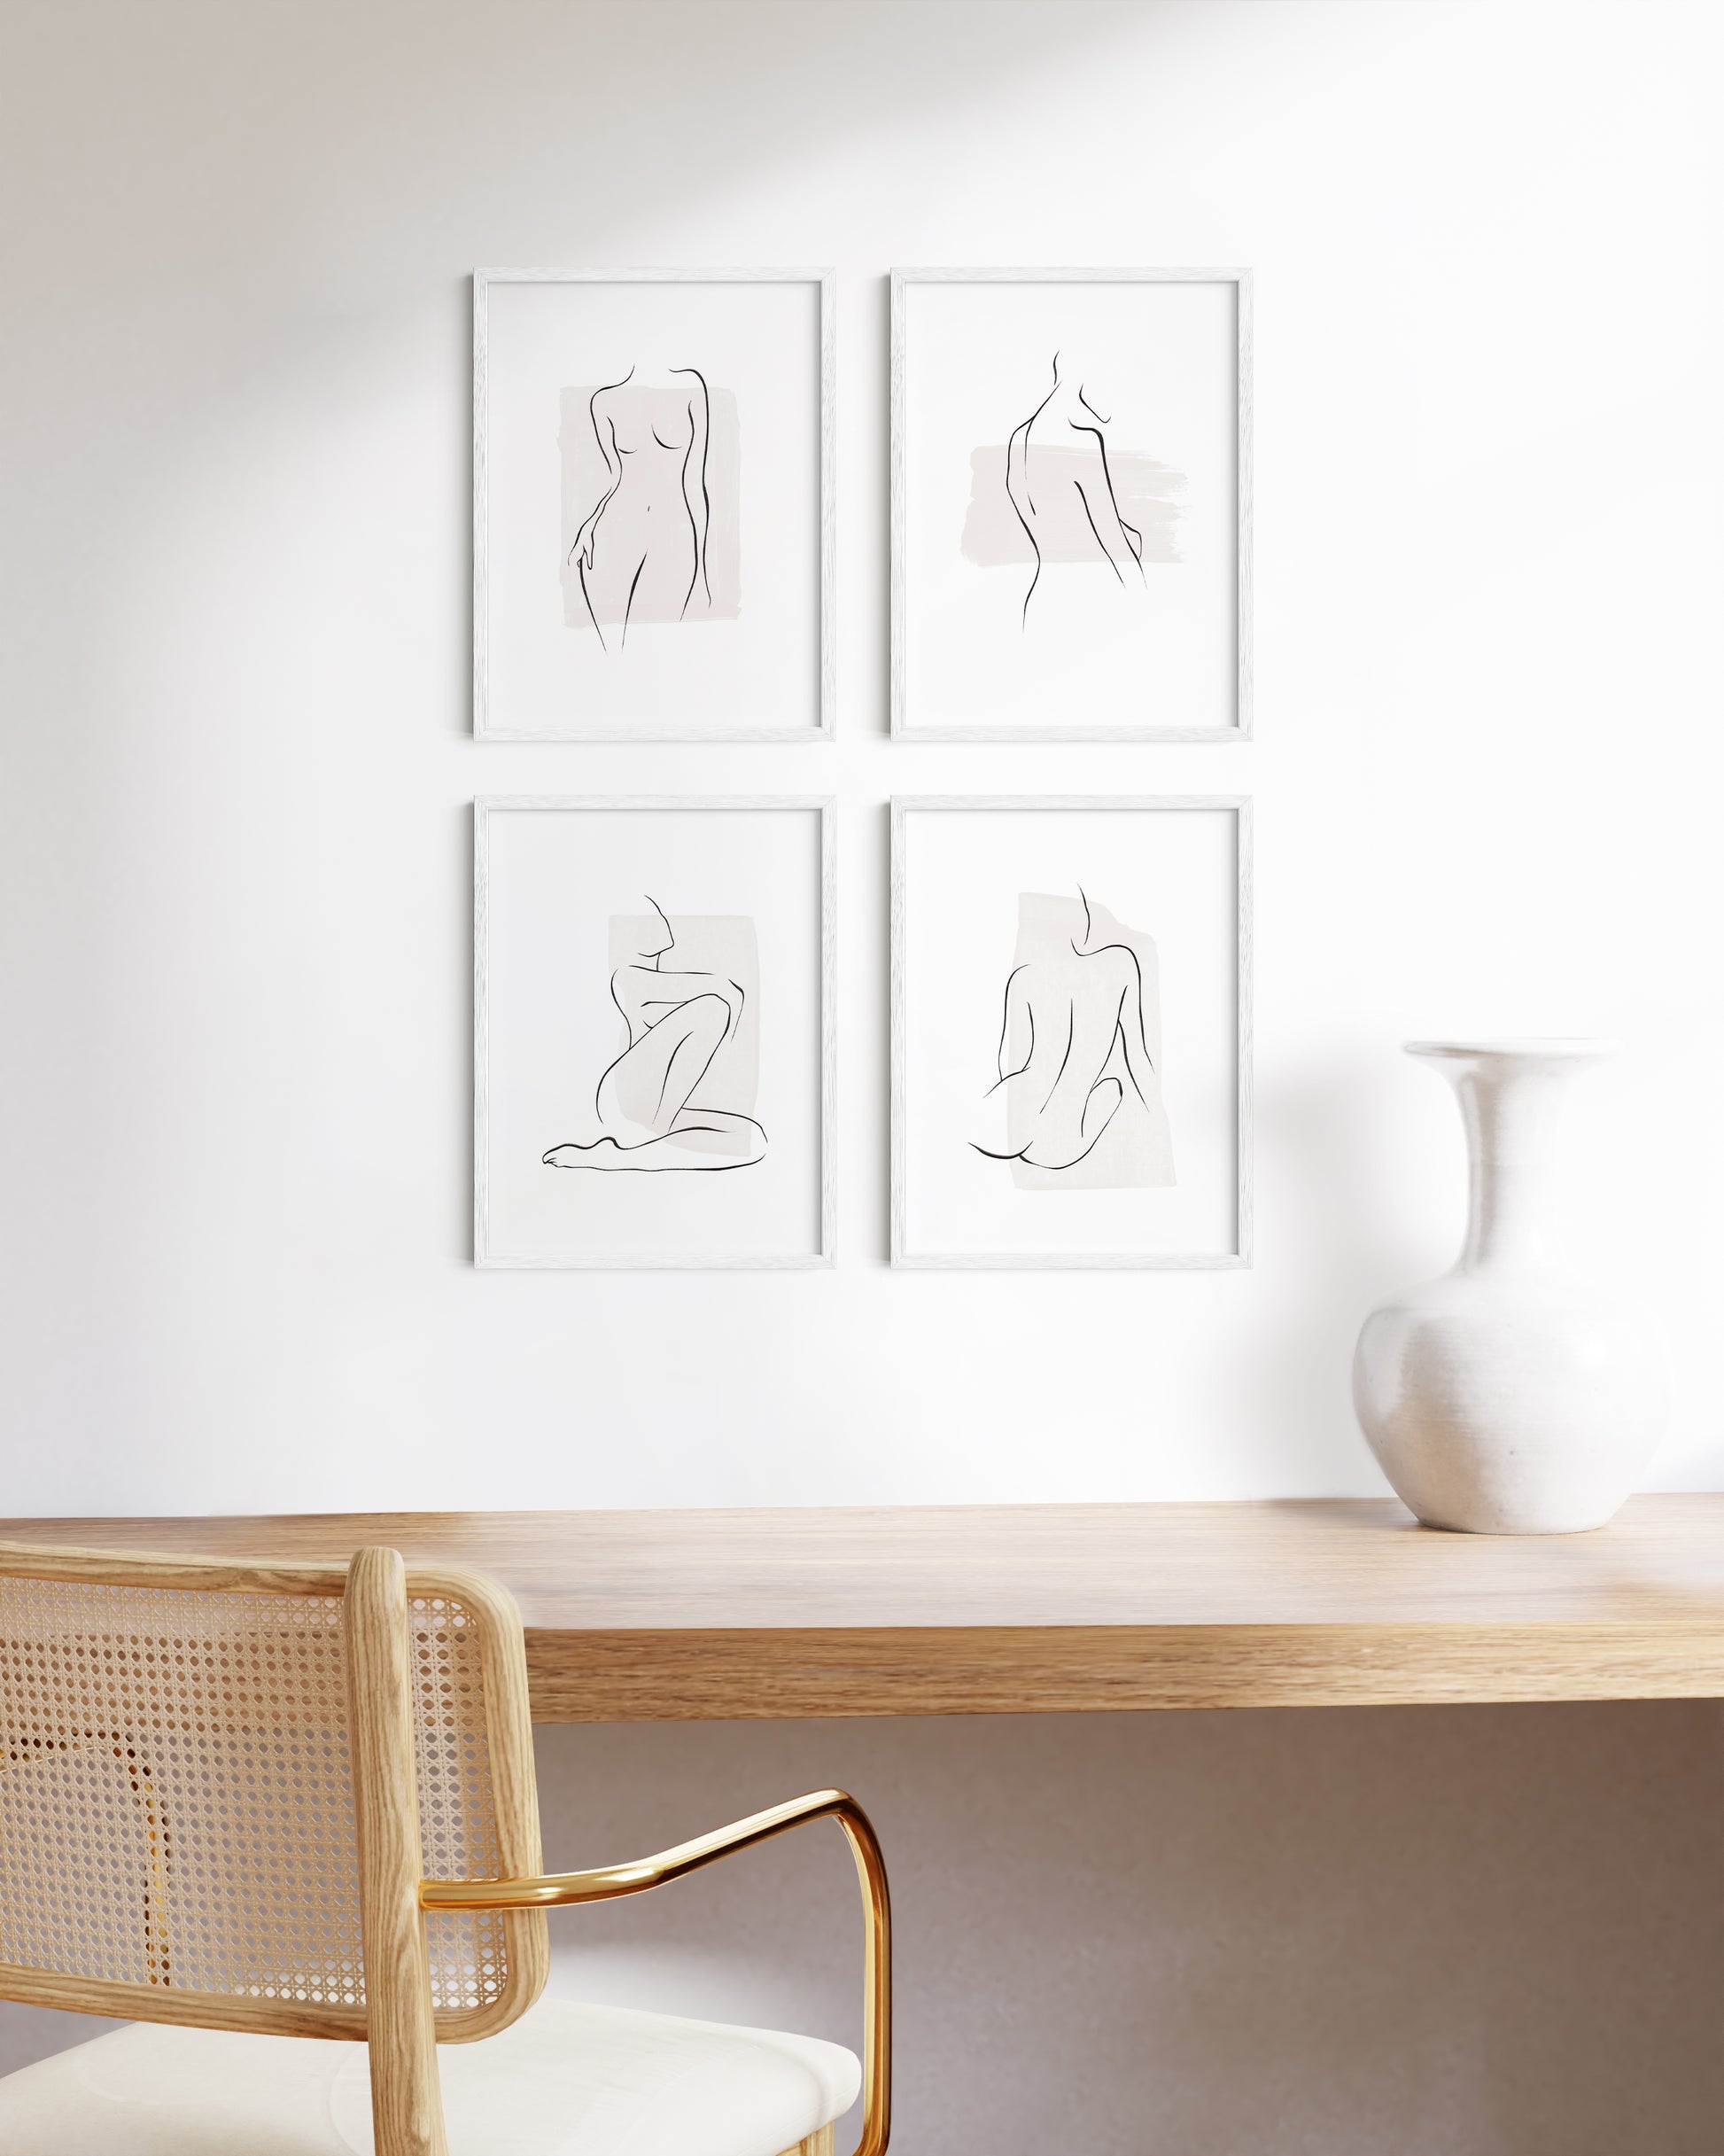 Haus and Hues Set of 6 12x16 Frames - Picture Frames 12x16 Set White  Frames, 12x16 Poster Frame White Picture Frames Pack, 12x16 Picture Frame  White